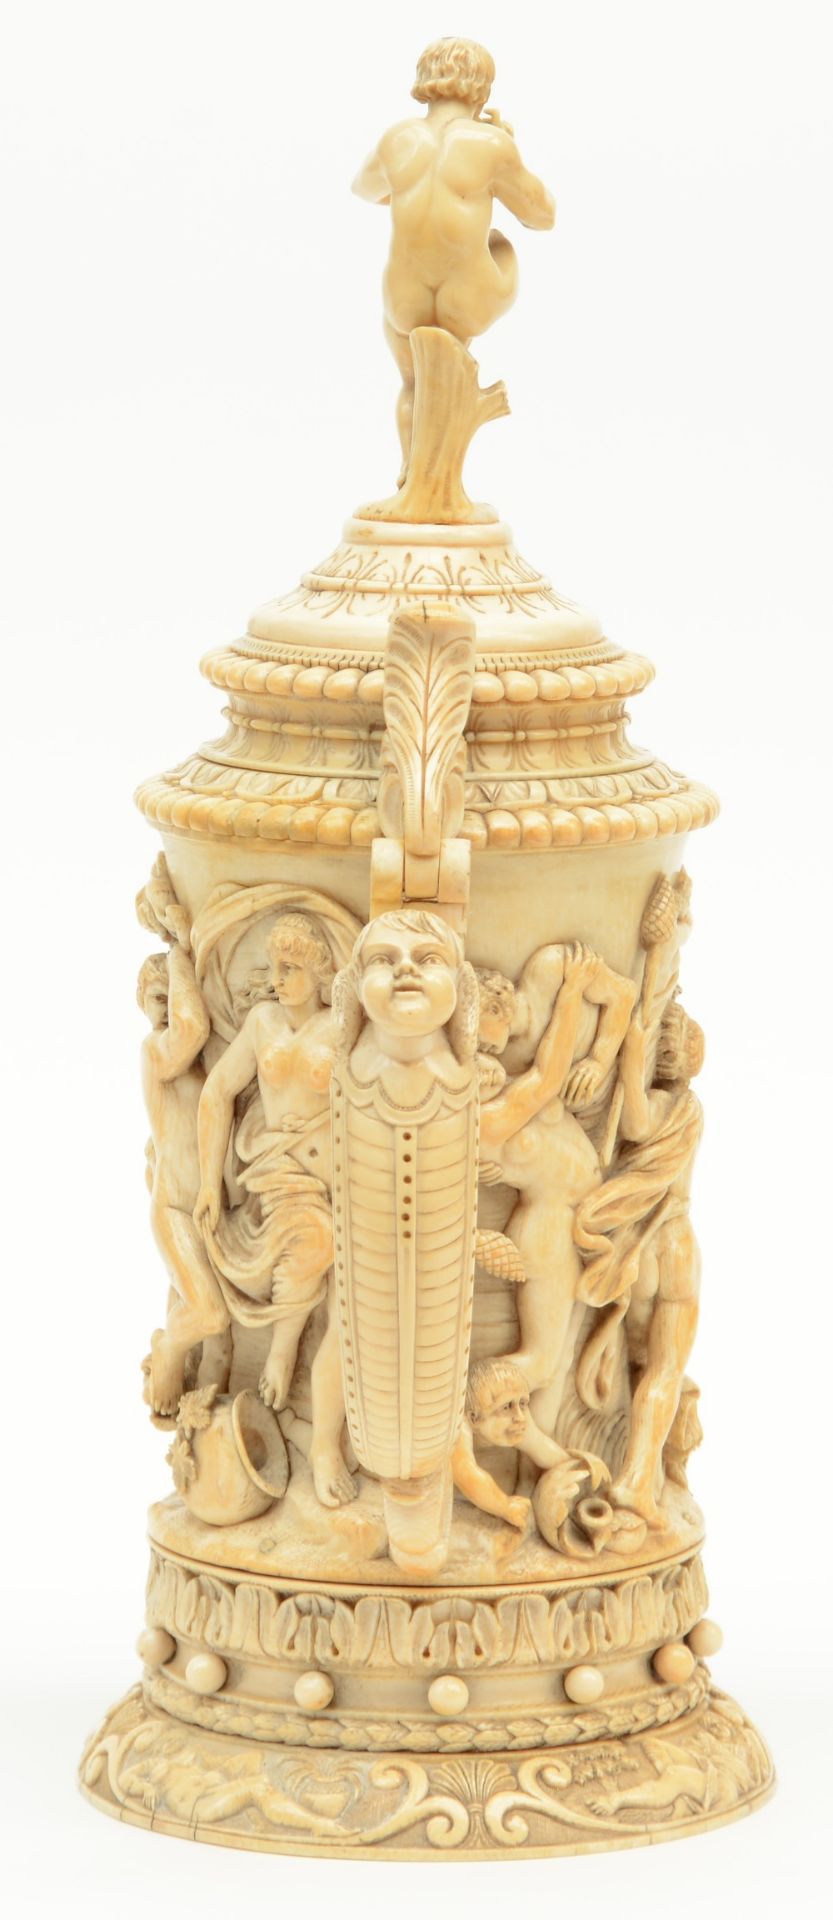 A rare German ivory Humpen, alto relievo sculpted with Bacchus on a chariot preceded by a drunken - Image 4 of 14